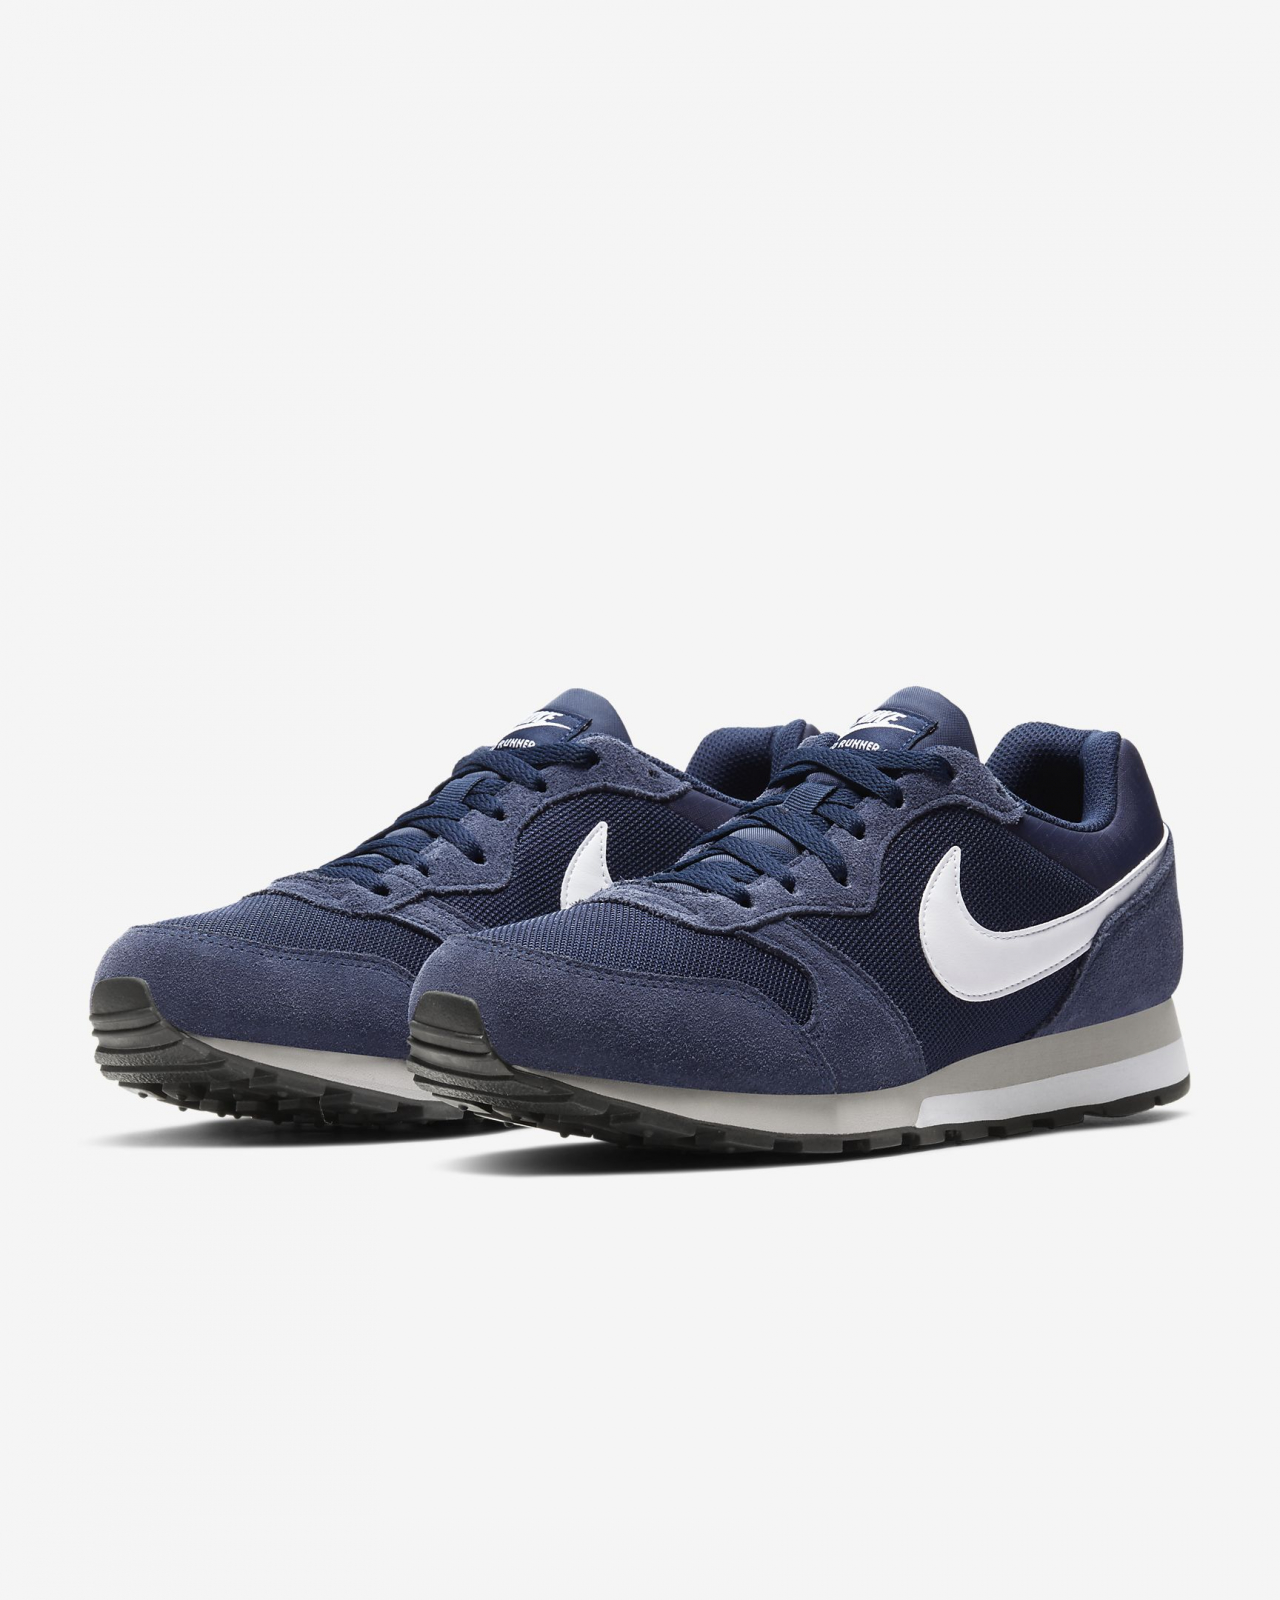 Birthplace boom topic NIKE MD Runner 2 - 749794-410